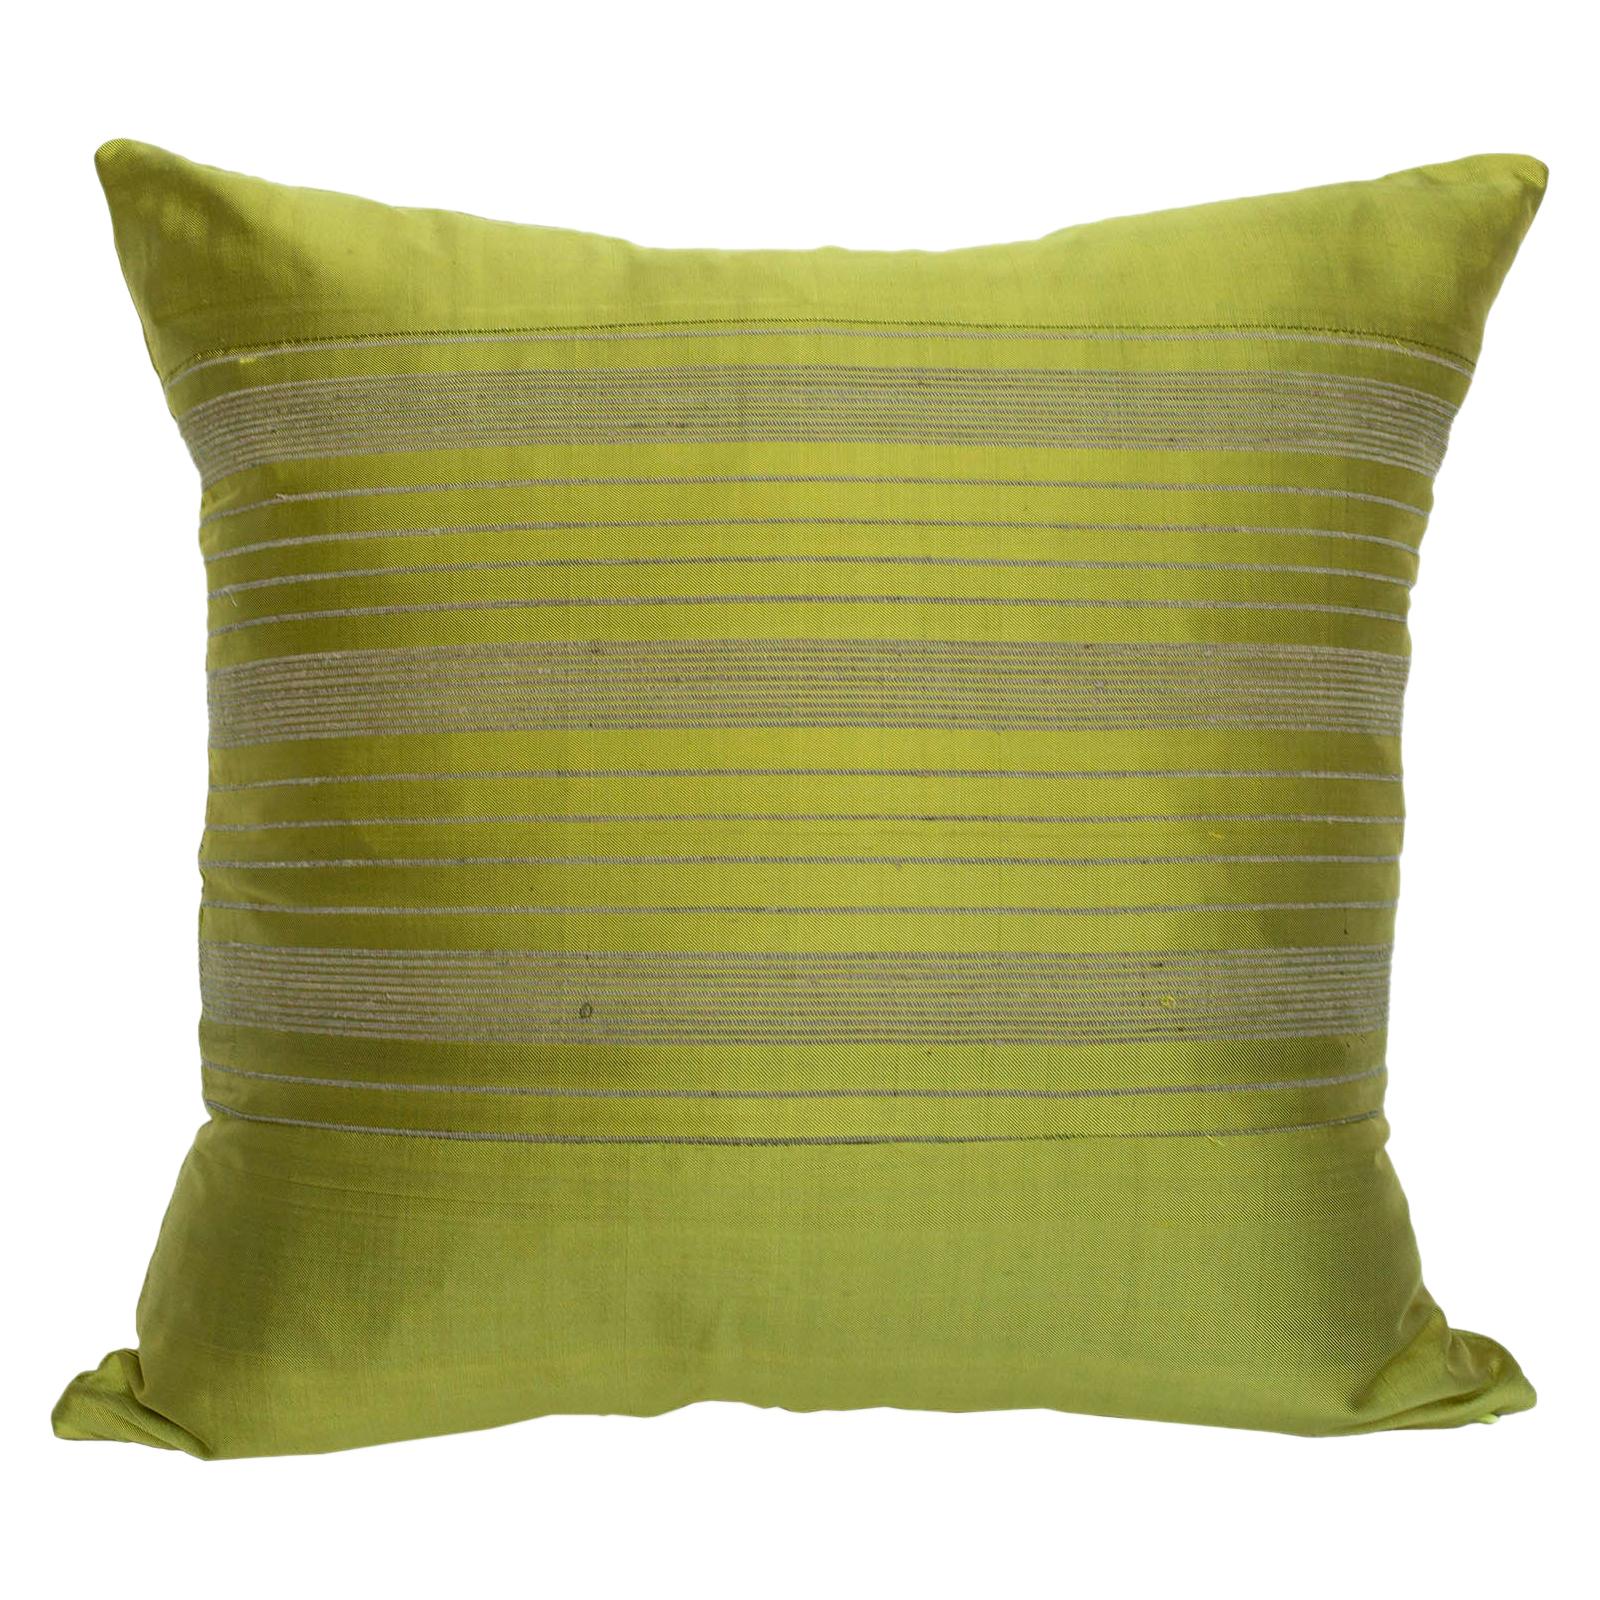 Lotus Flower and Silk Pillow from Myanmar, Chartreuse 